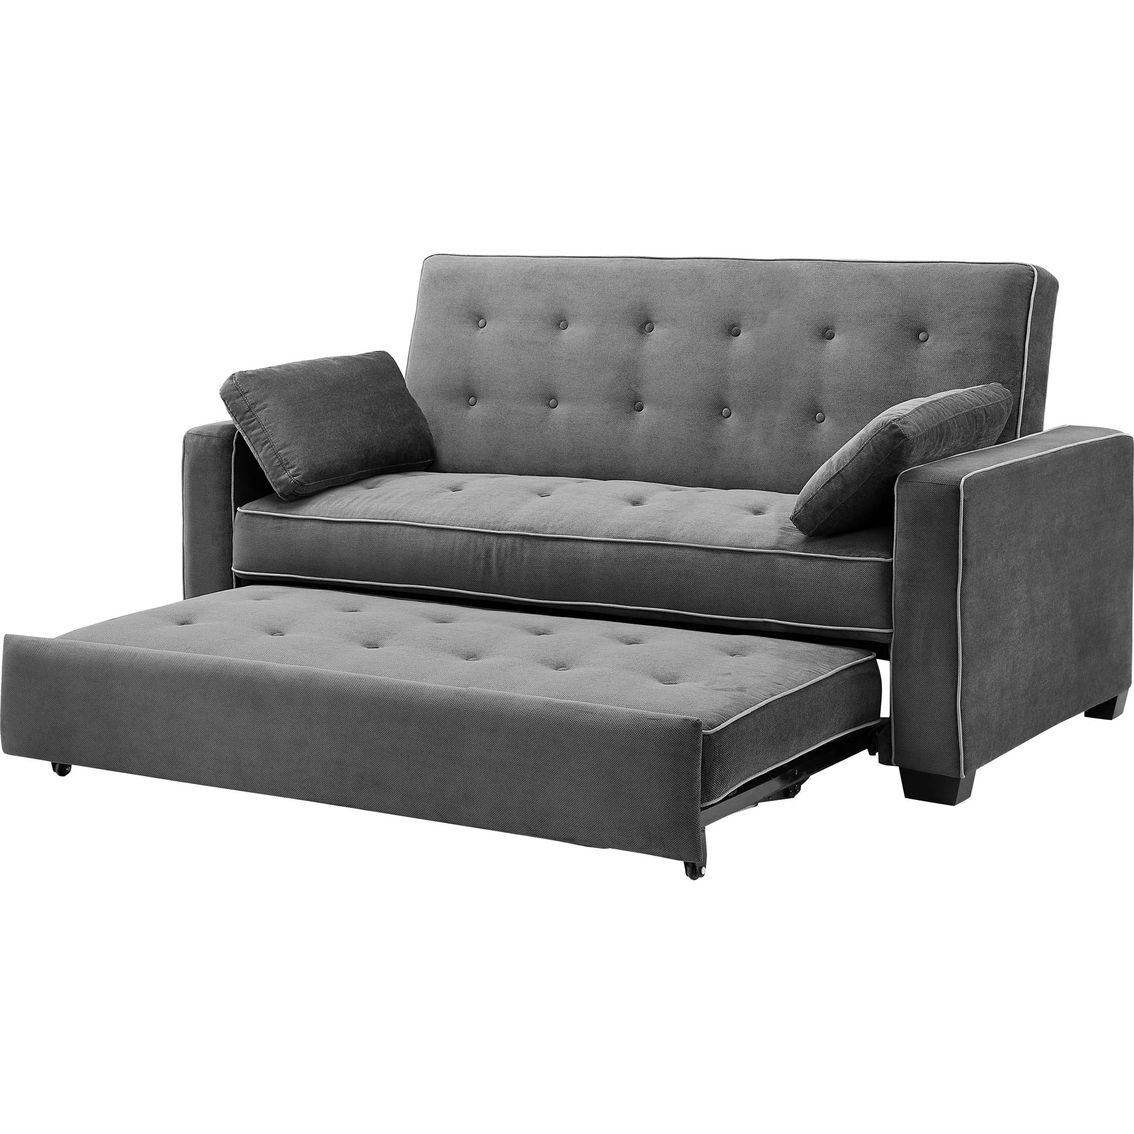 Convertible Sofas In Well Known Serta Augustine Convertible Sofa Bed (View 1 of 15)